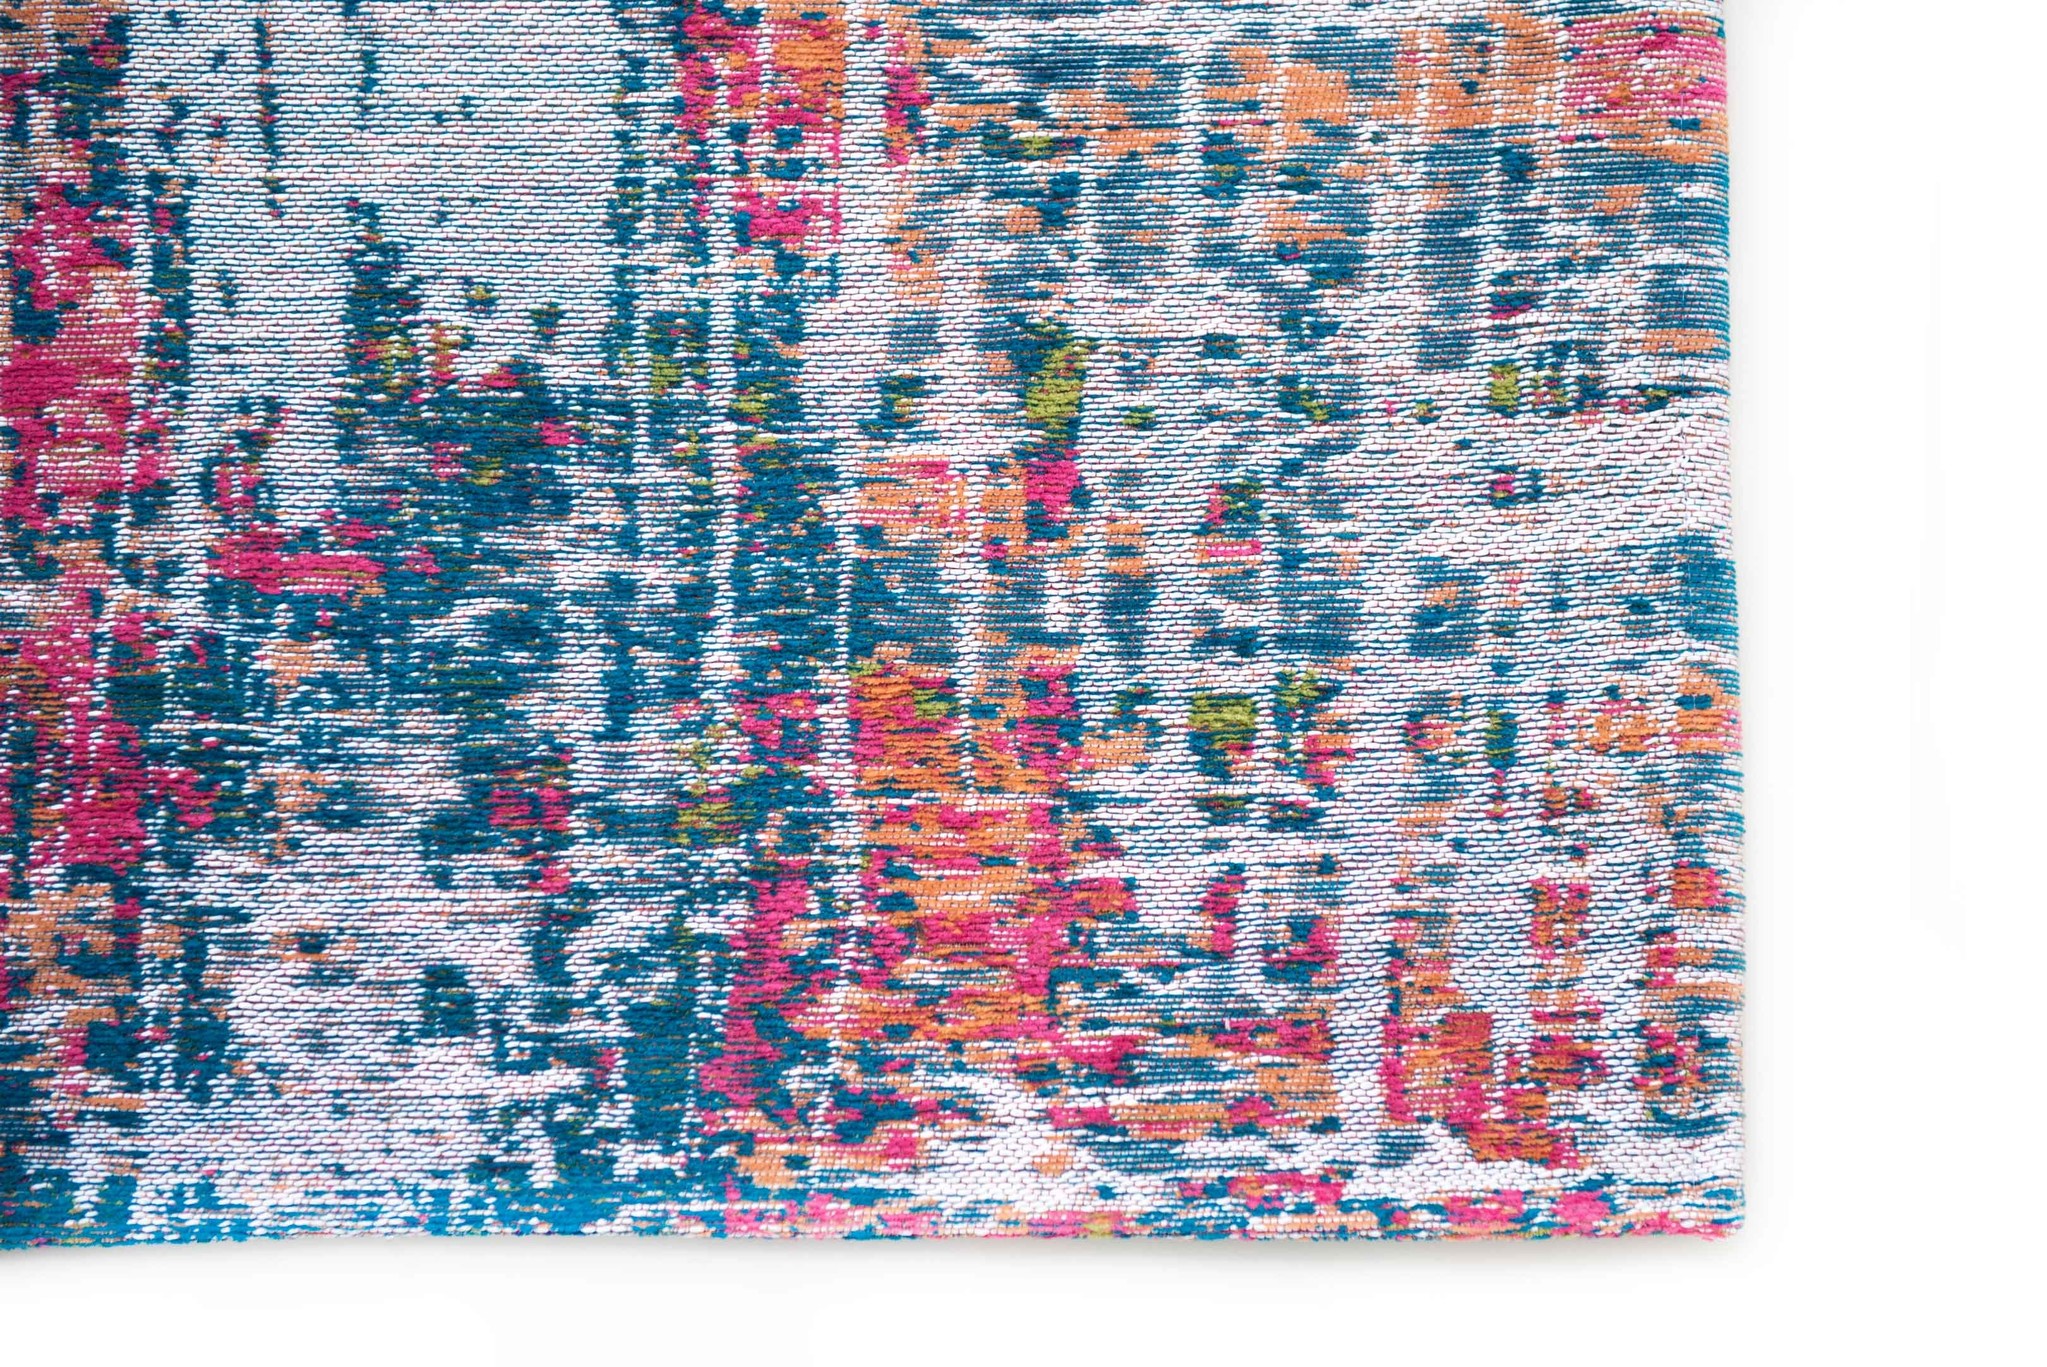 Abstract Multi Flatwoven Rug ☞ Size: 6' 7" x 9' 2" (200 x 280 cm)